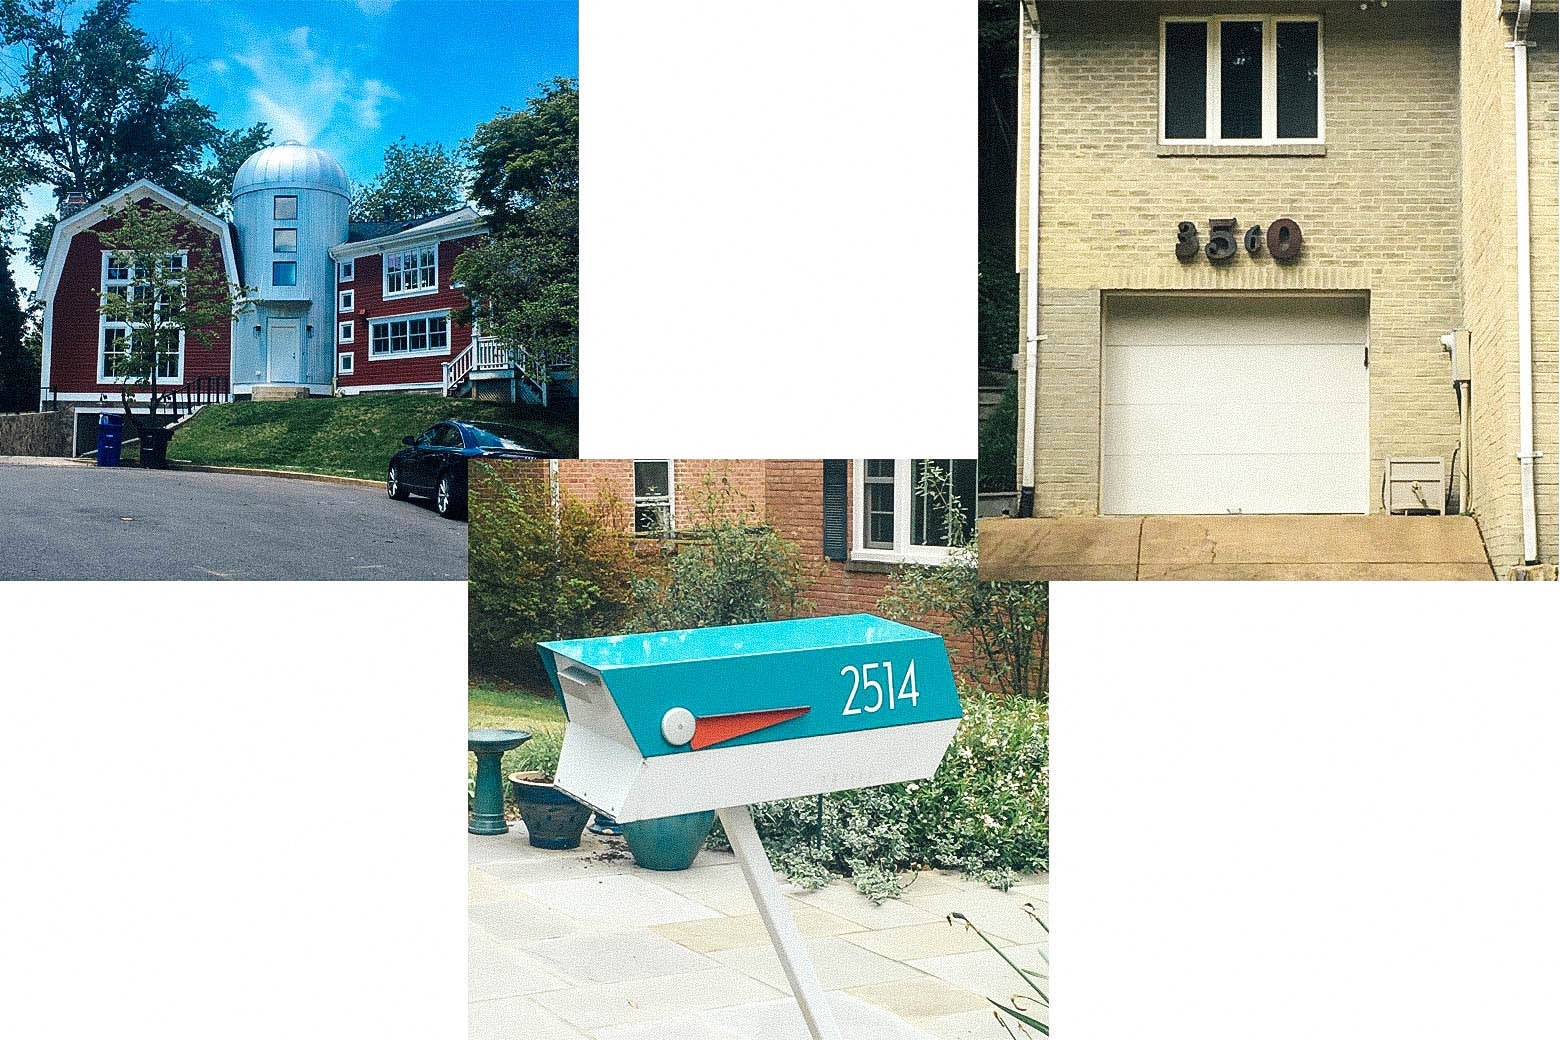 North Arlington’s wildest house, North Arlington’s funkiest address numbers, and North Arlington’s coolest mailbox.